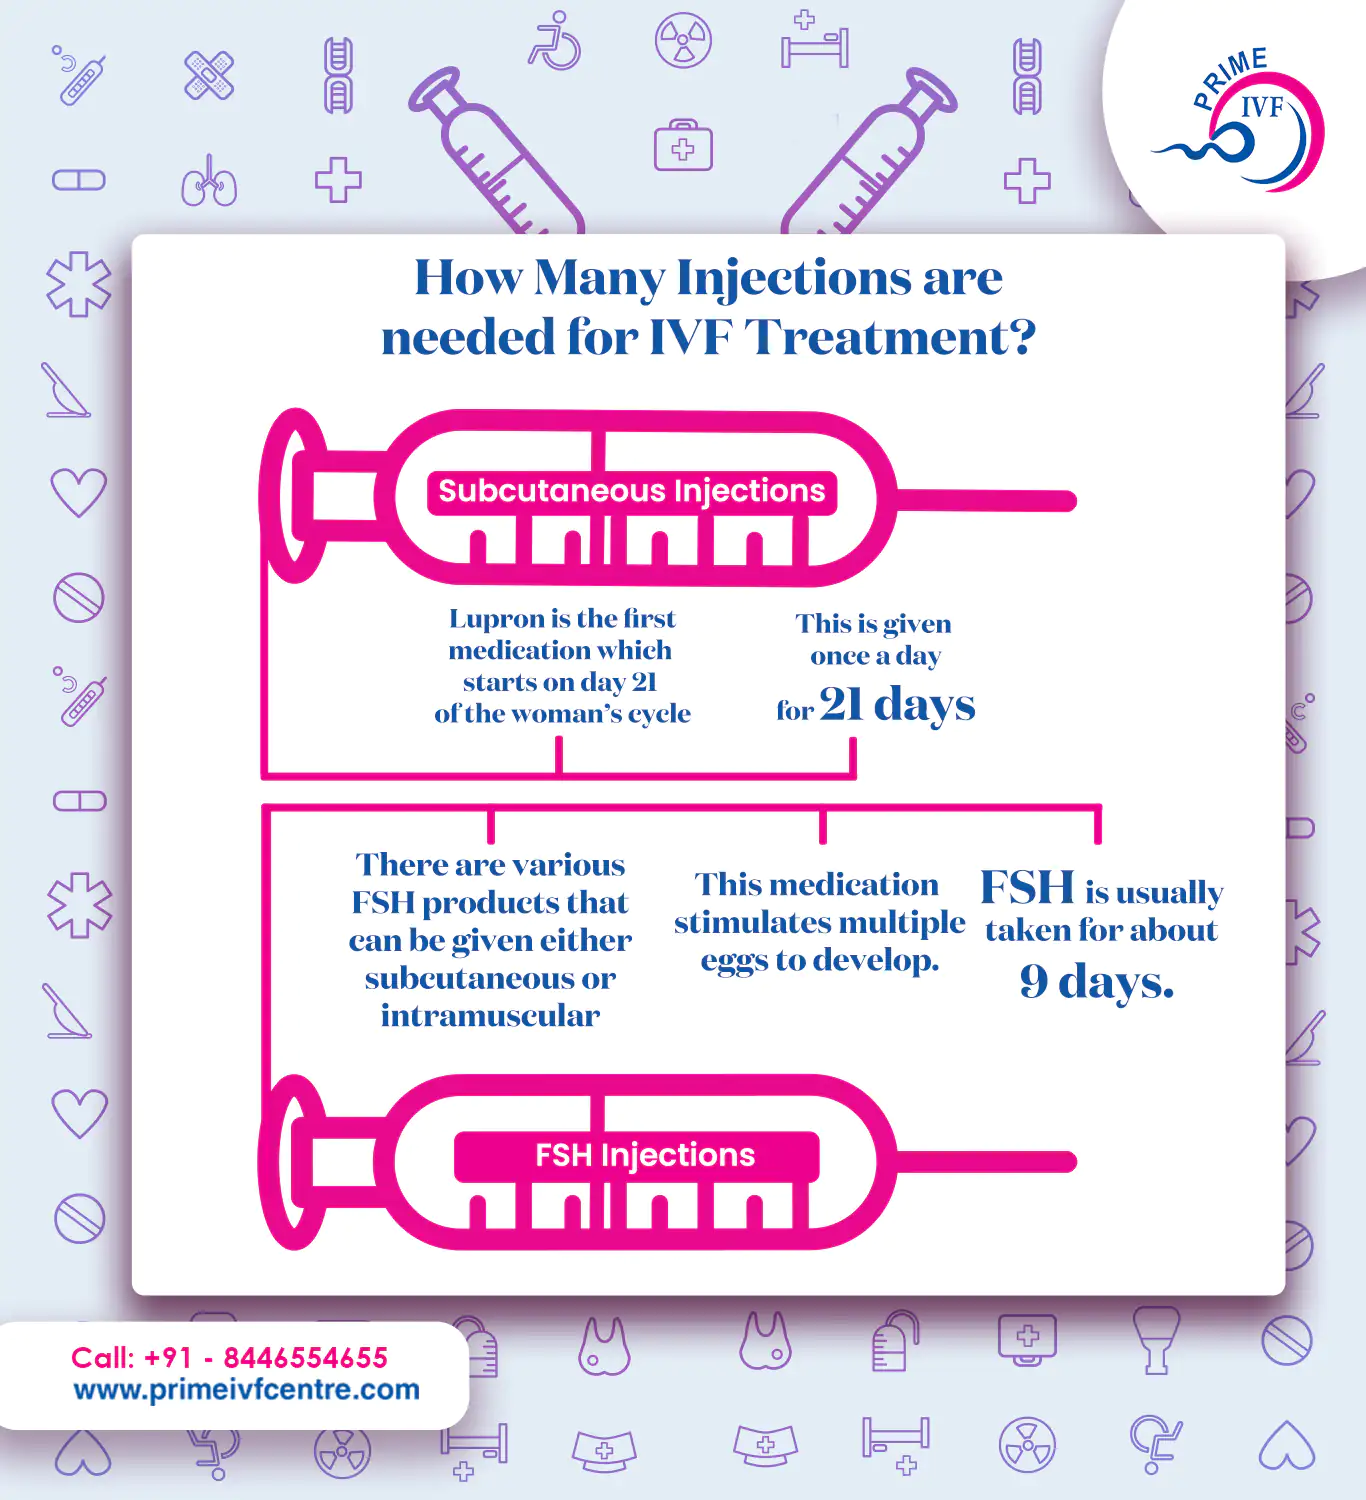 how-many-injections-are-needed-for-ivf-treatment-prime-ivf-centre